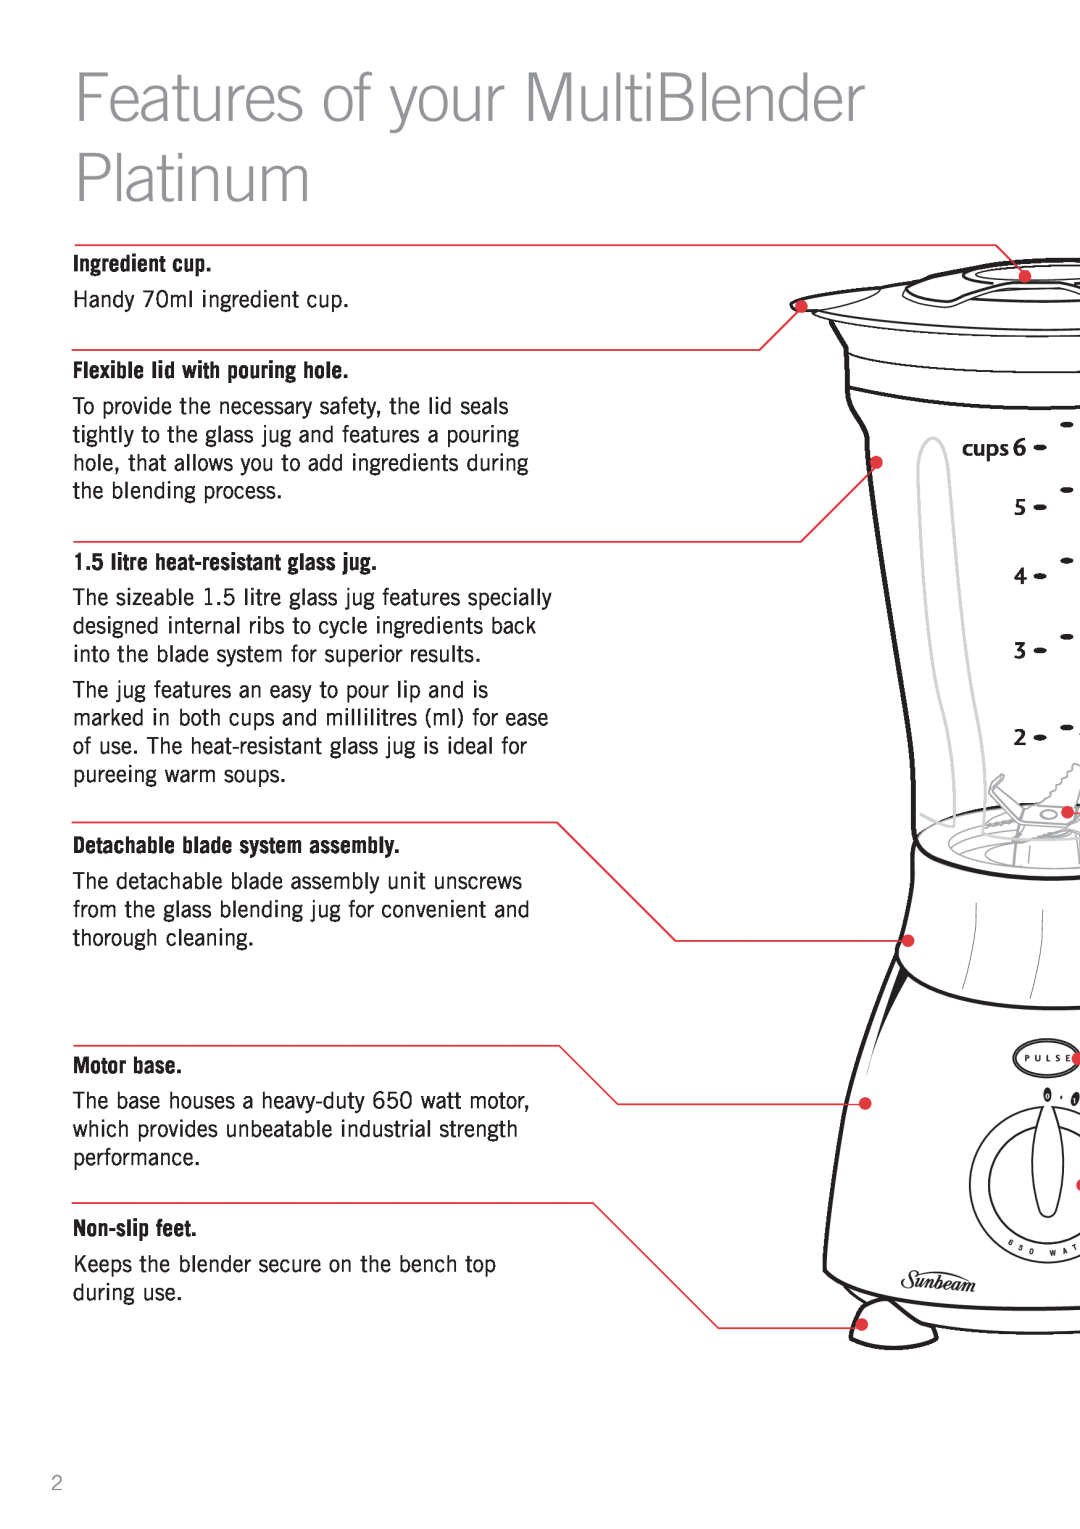 Sunbeam PB7610 manual Features of your MultiBlender Platinum, Ingredient cup, Flexible lid with pouring hole, Motor base 